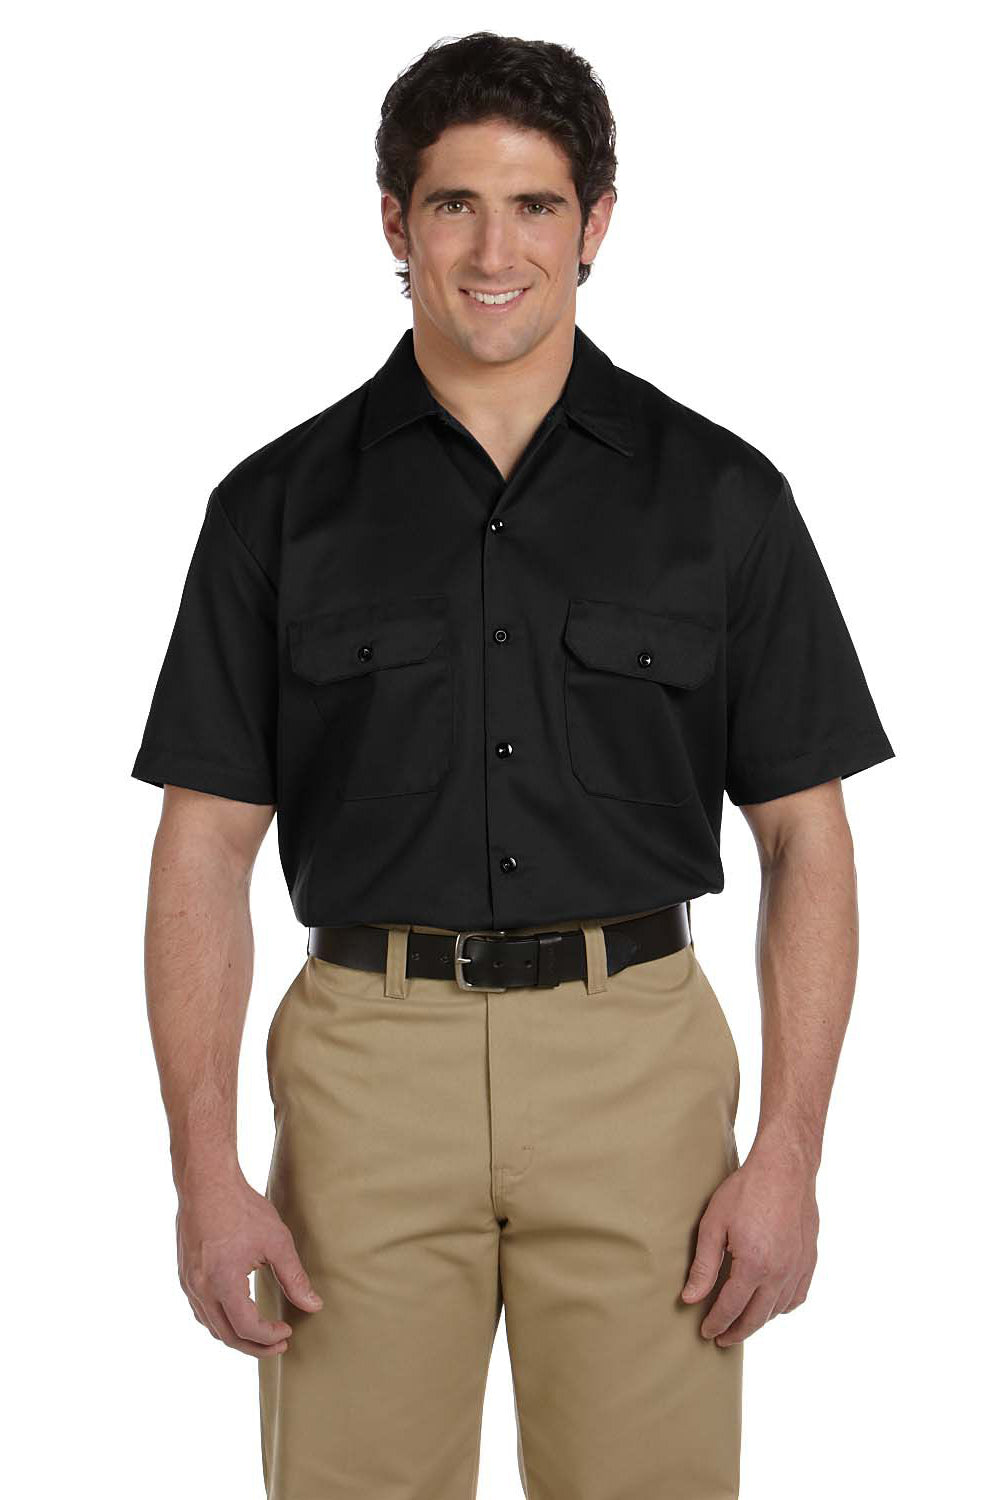 Dickies 1574 Mens Moisture Wicking Short Sleeve Button Down Shirt w/ Double Pockets Black Front